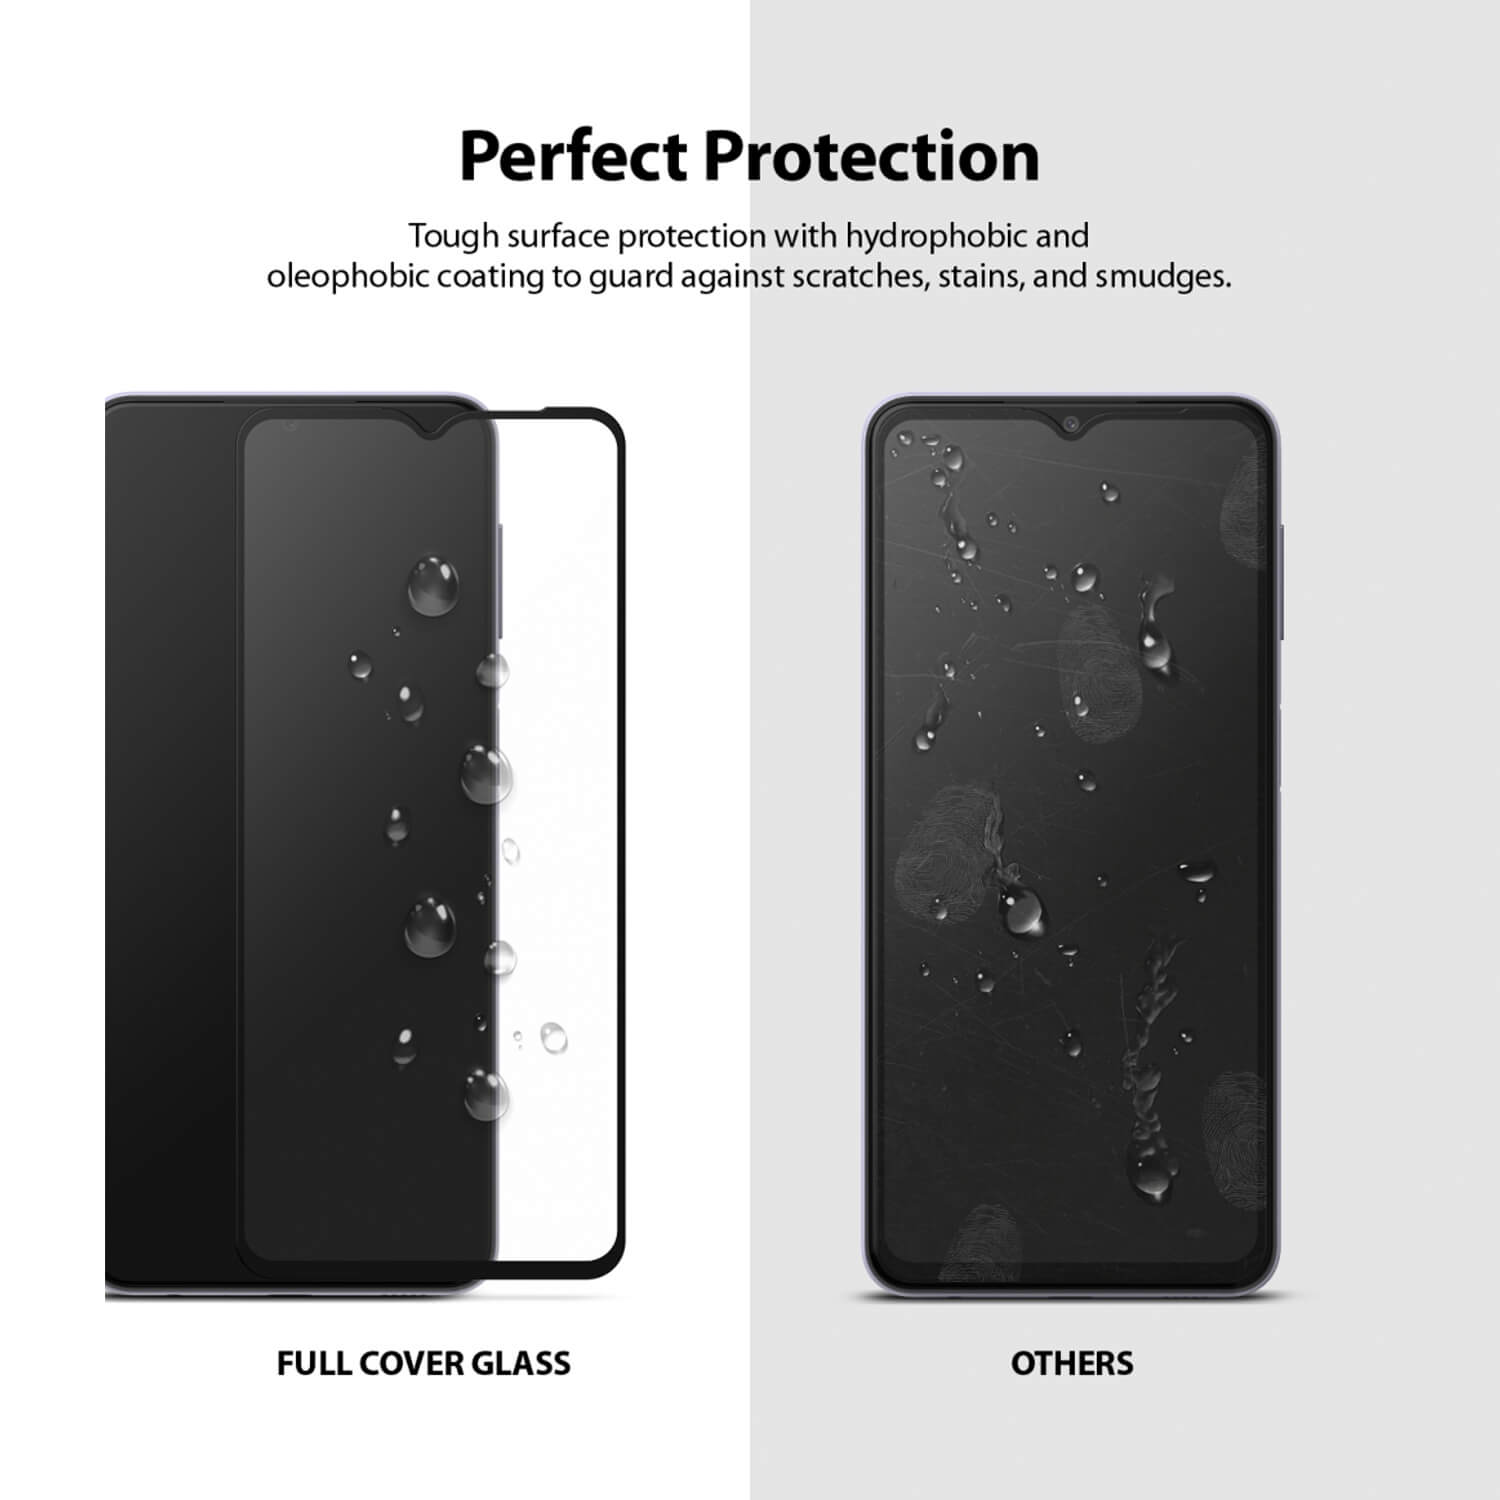 Ringke Galaxy A32 5G / A12 / A02 Screen Protector Invisible Defender